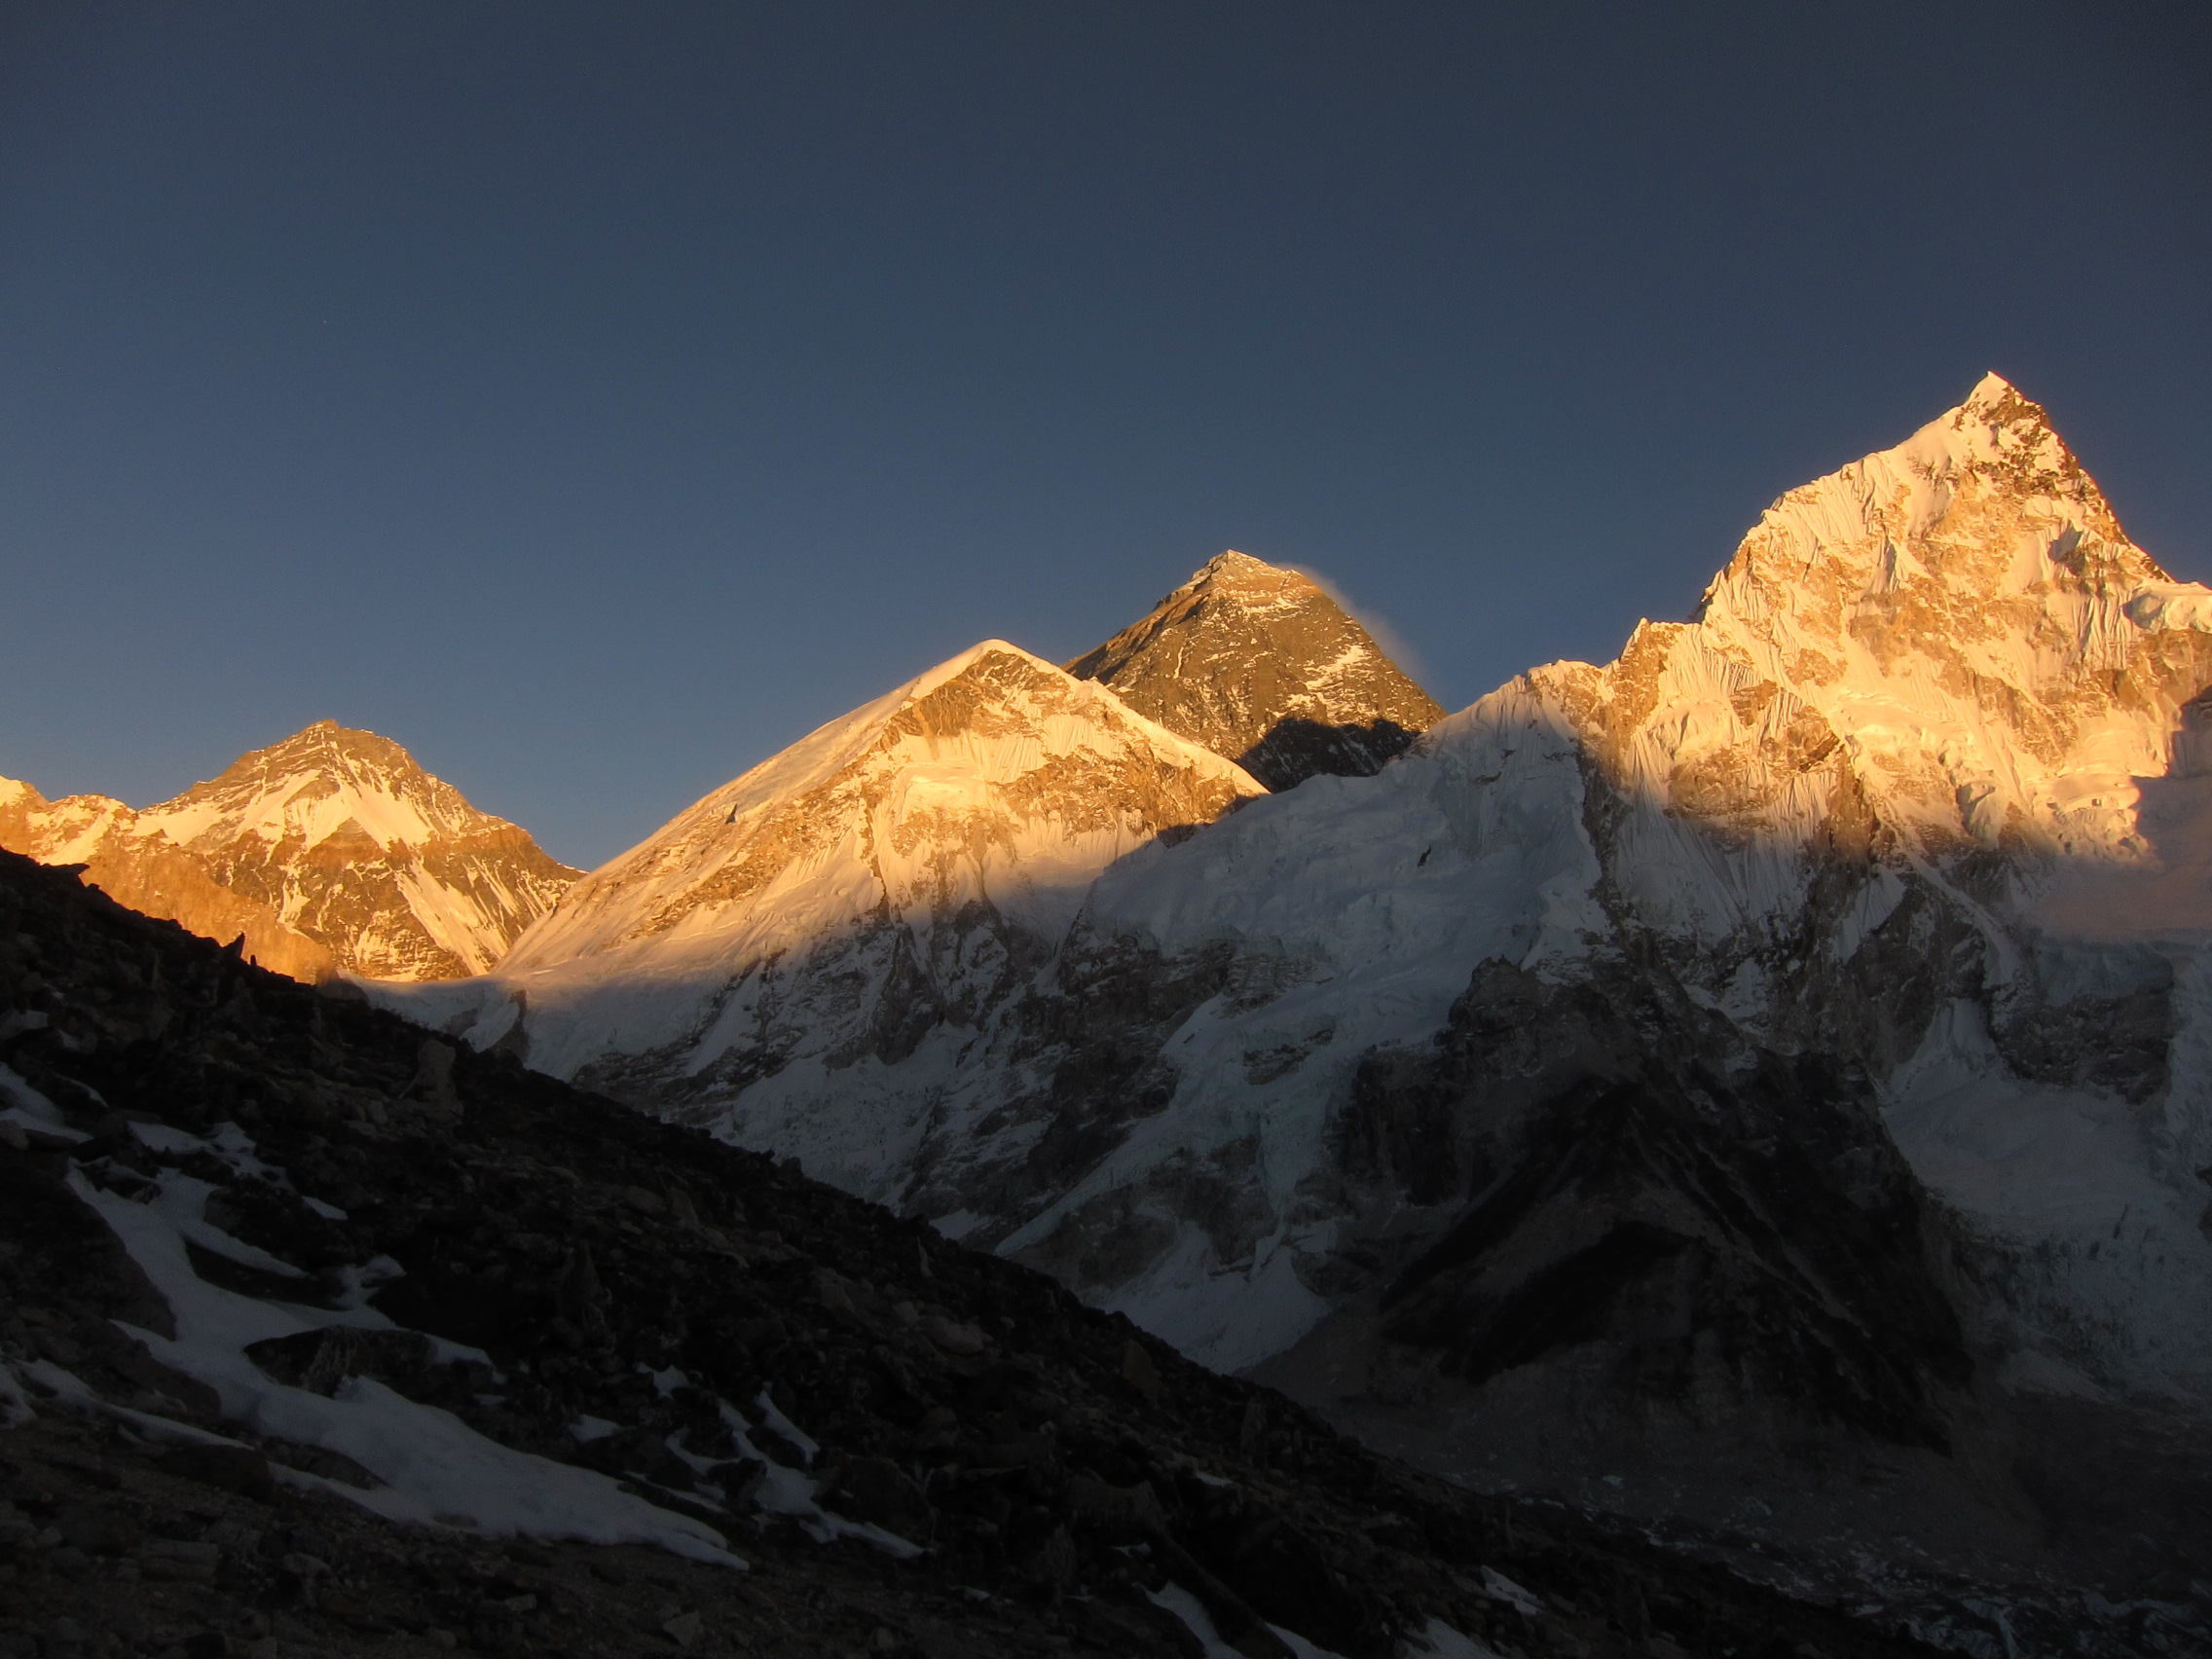 Sunset View Over Nutse and Everest, View from Kala Patthar View Point.